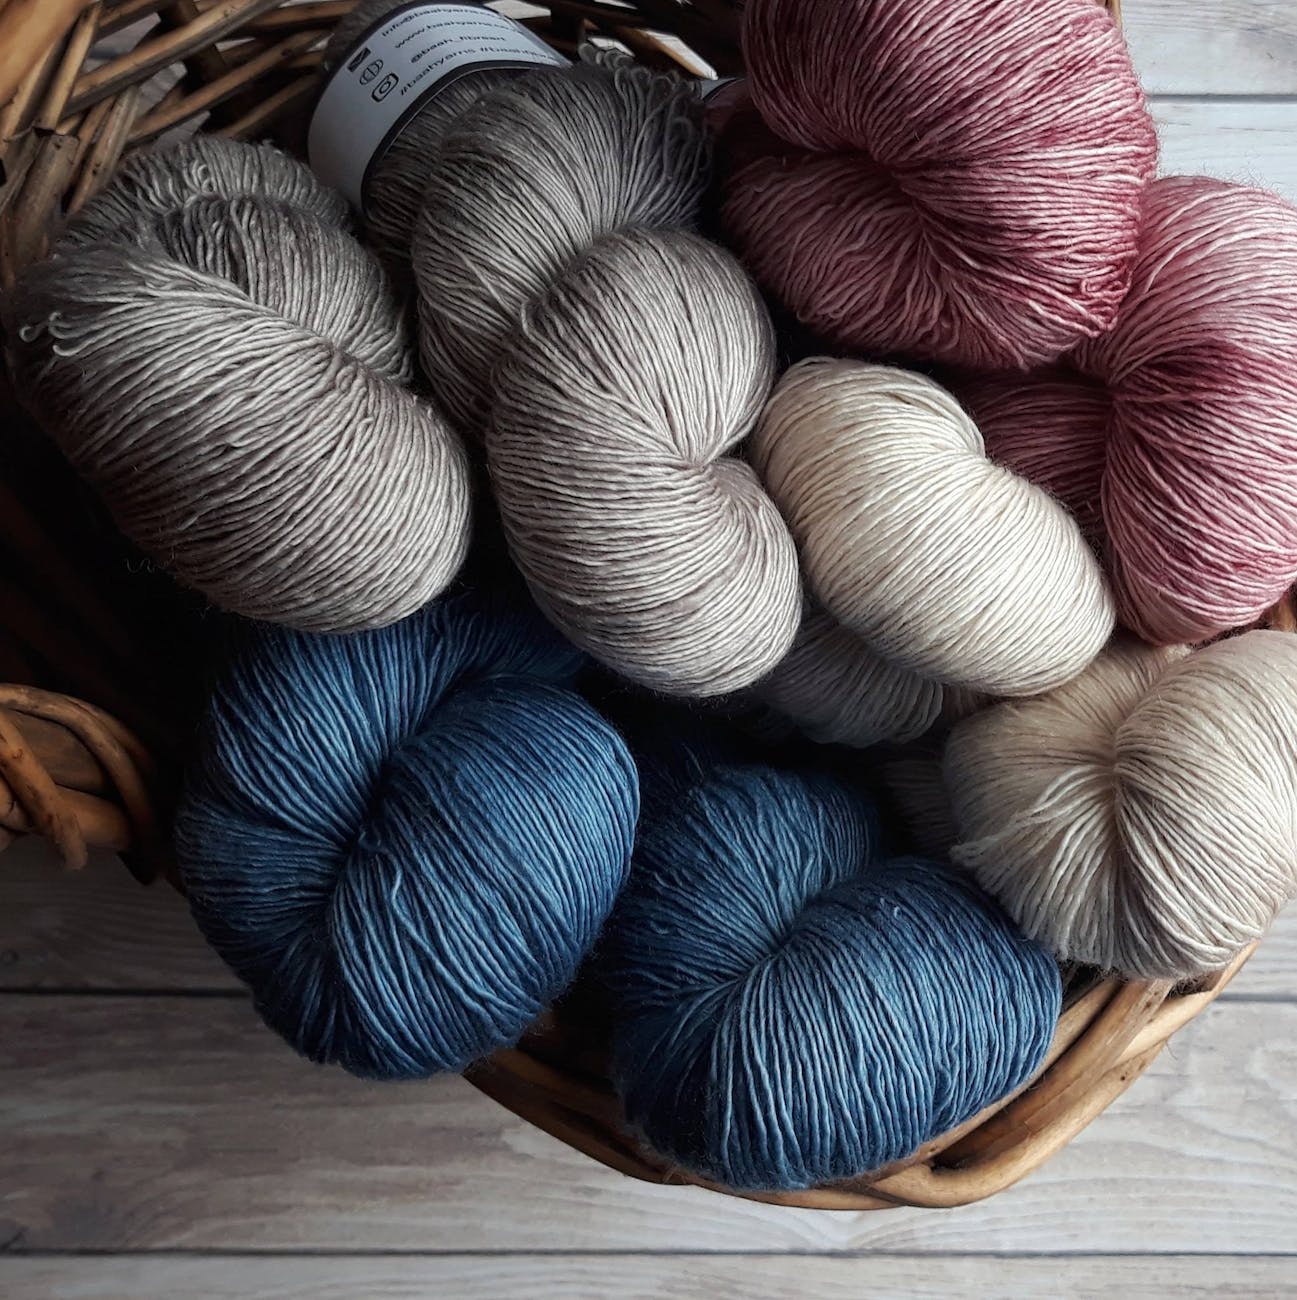 Knitting is a great hobby to take up, and here is why